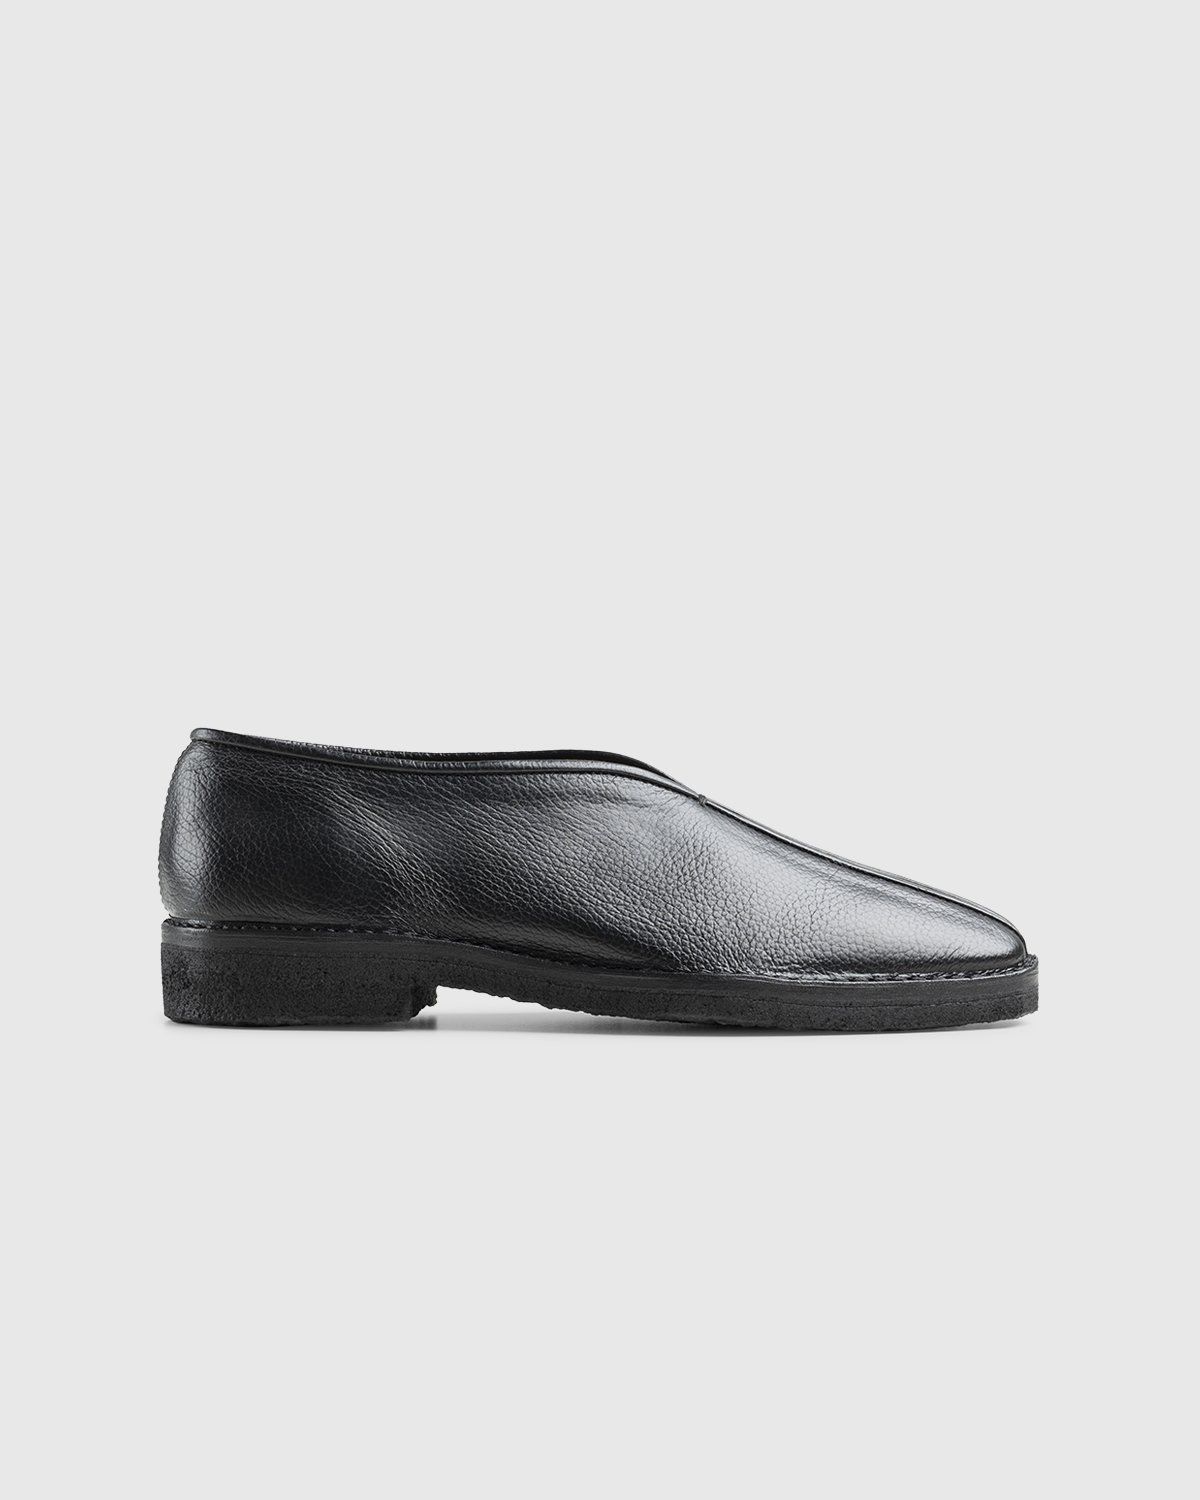 Lemaire – Leather Chinese Slippers Black - Slip-Ons - Black - Image 1